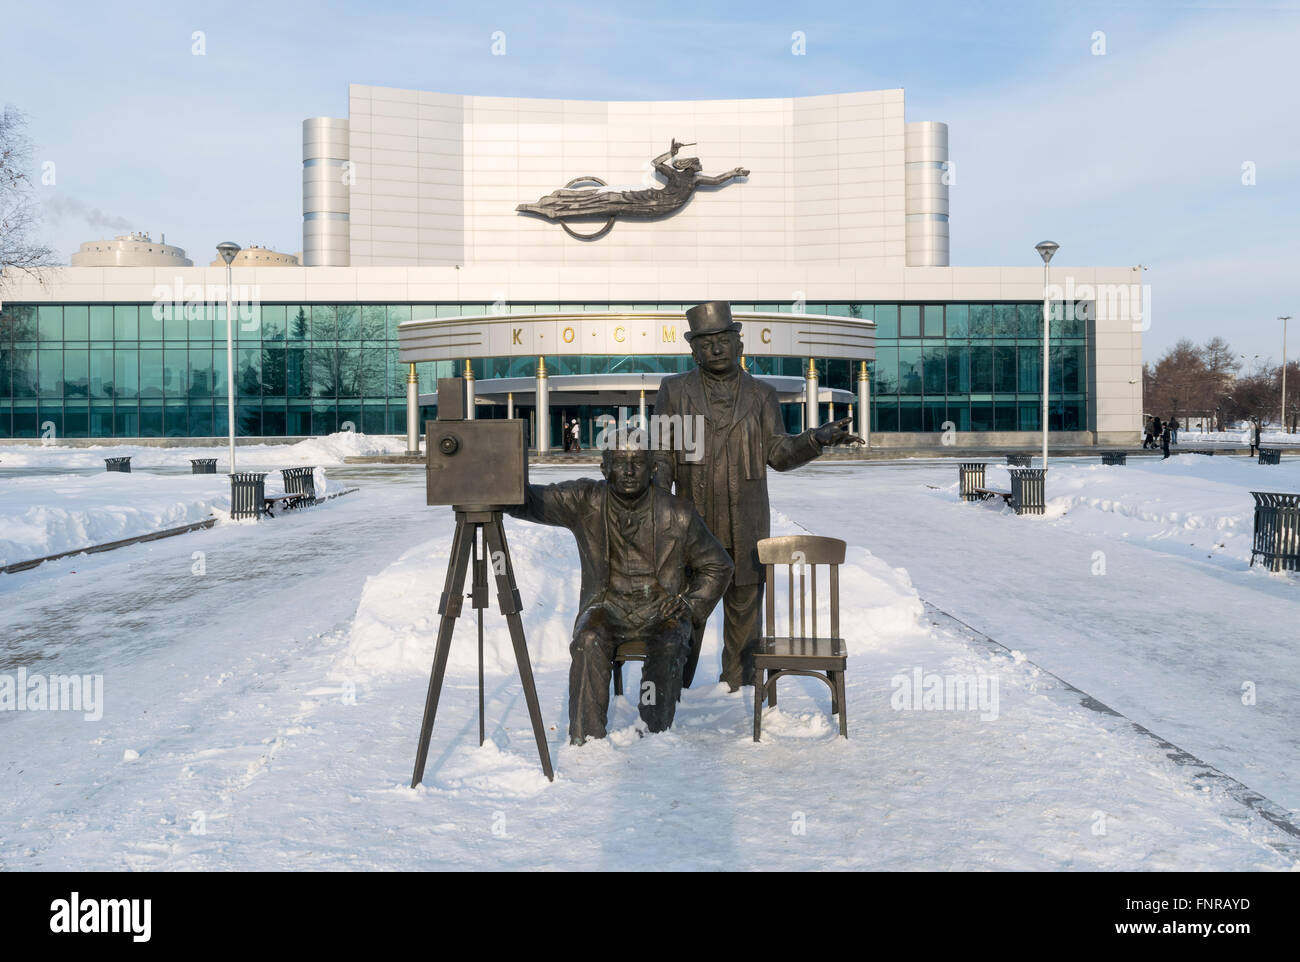 Kosmos theatre and Lumiere brothers sculpture in winter Stock Photo